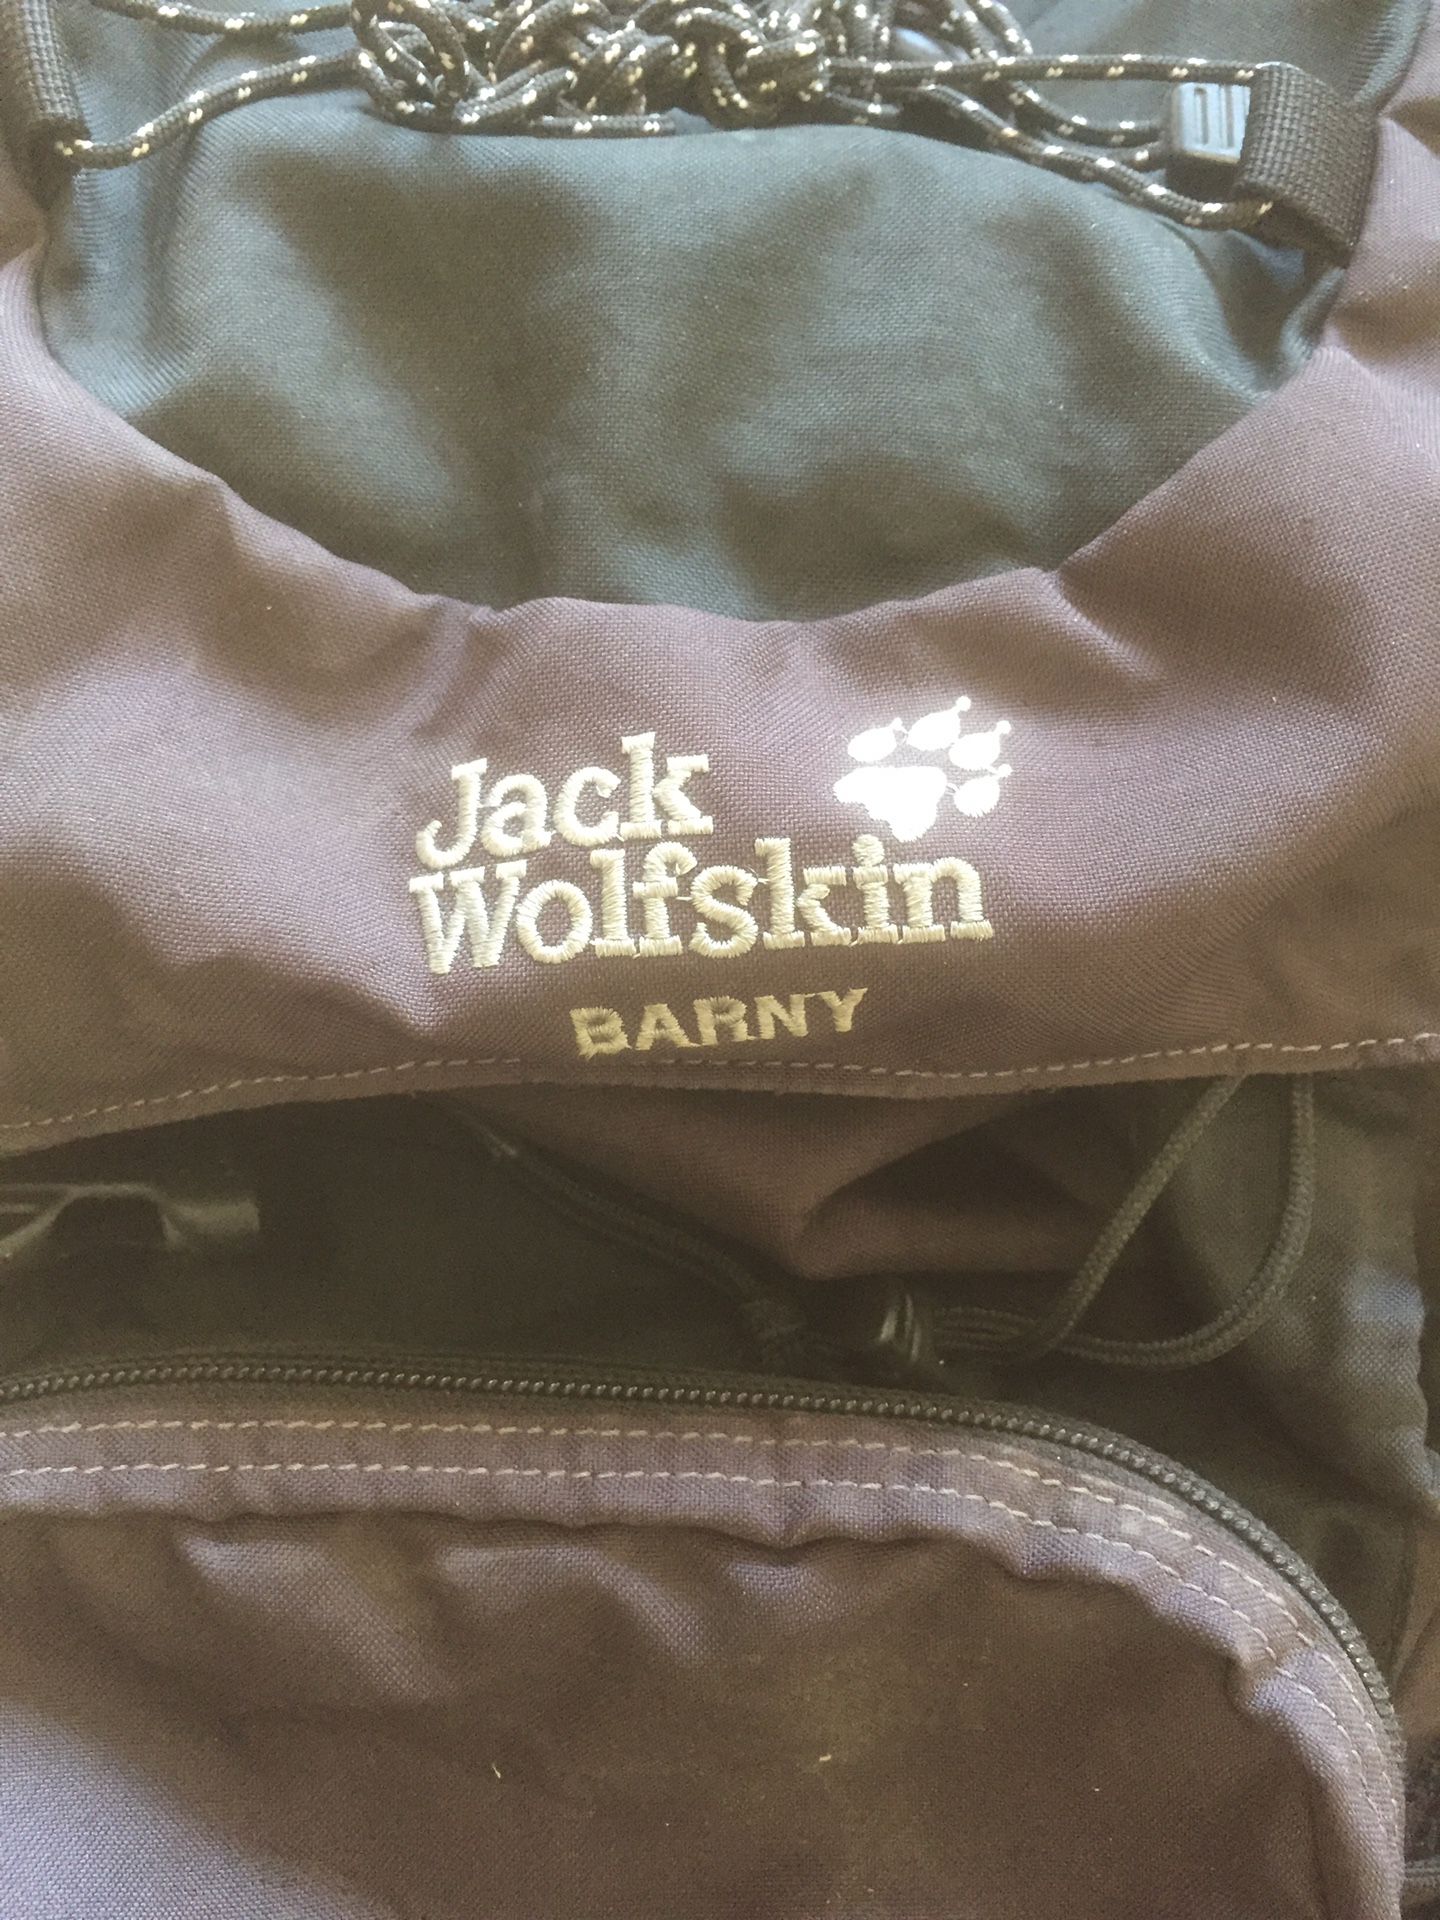 Jack Wolfskin Barny daypack with Air mesh breathable back panel